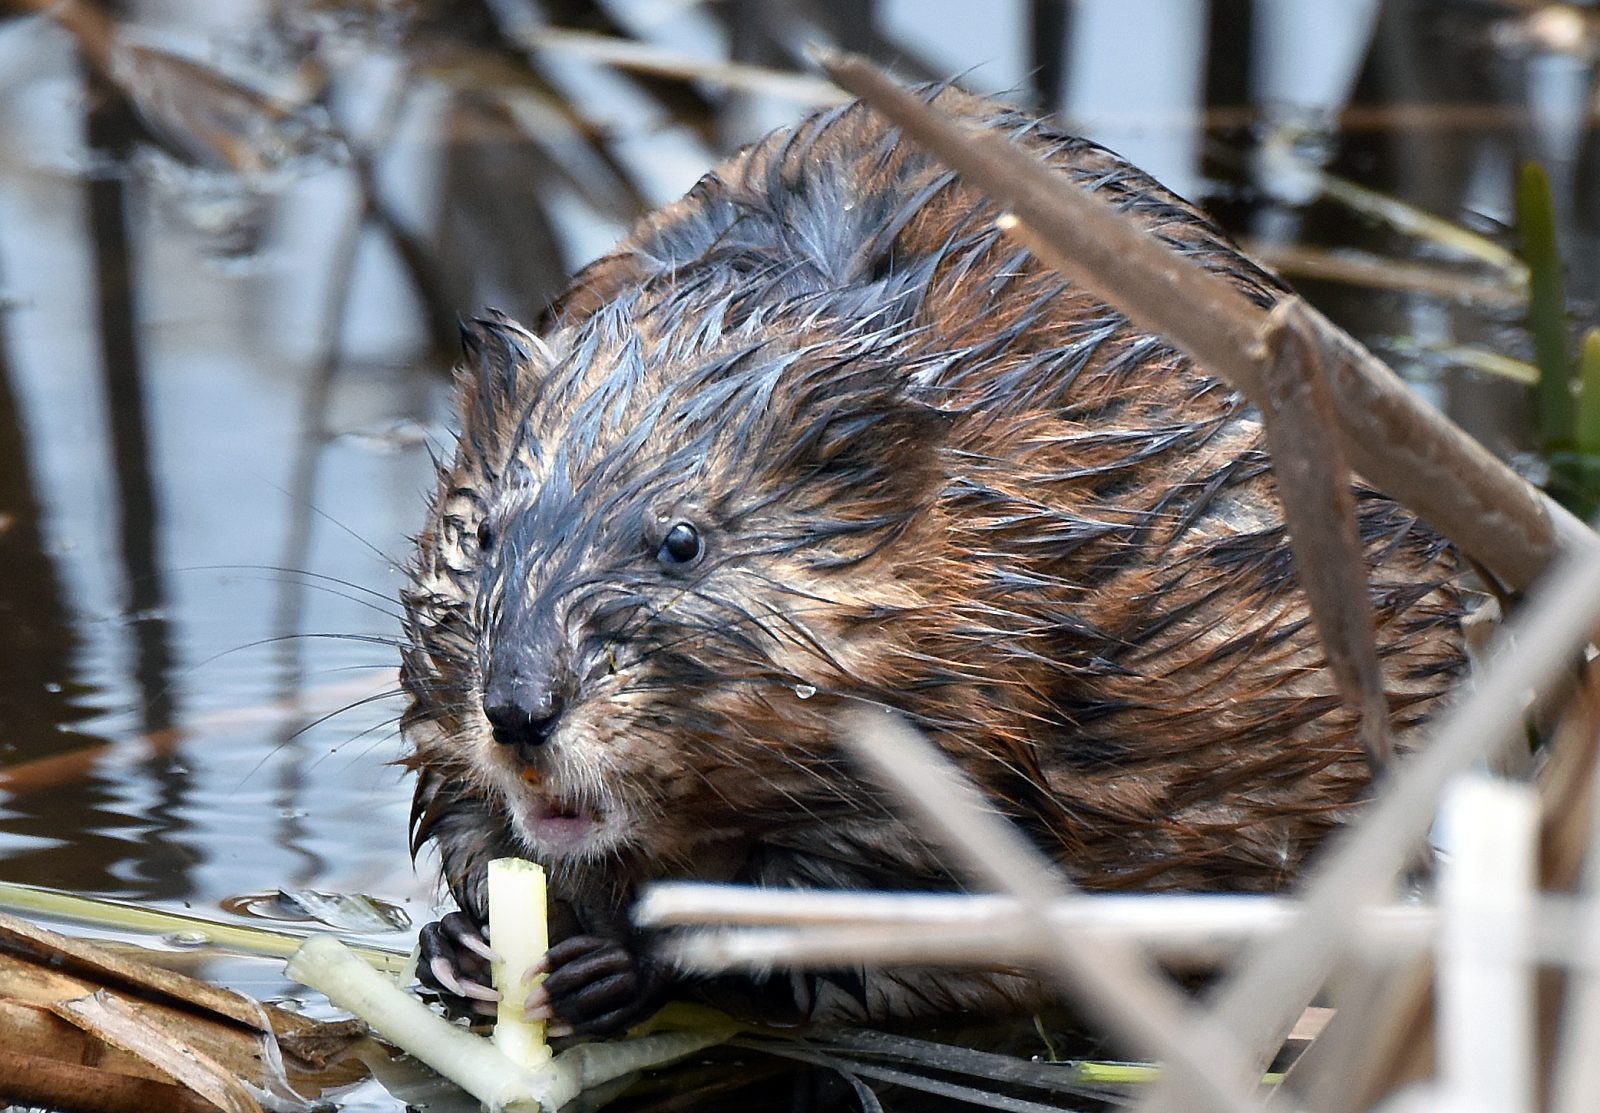 A muskrat in Great Meadows National Wildlife Refuge in Concord, Massachusetts